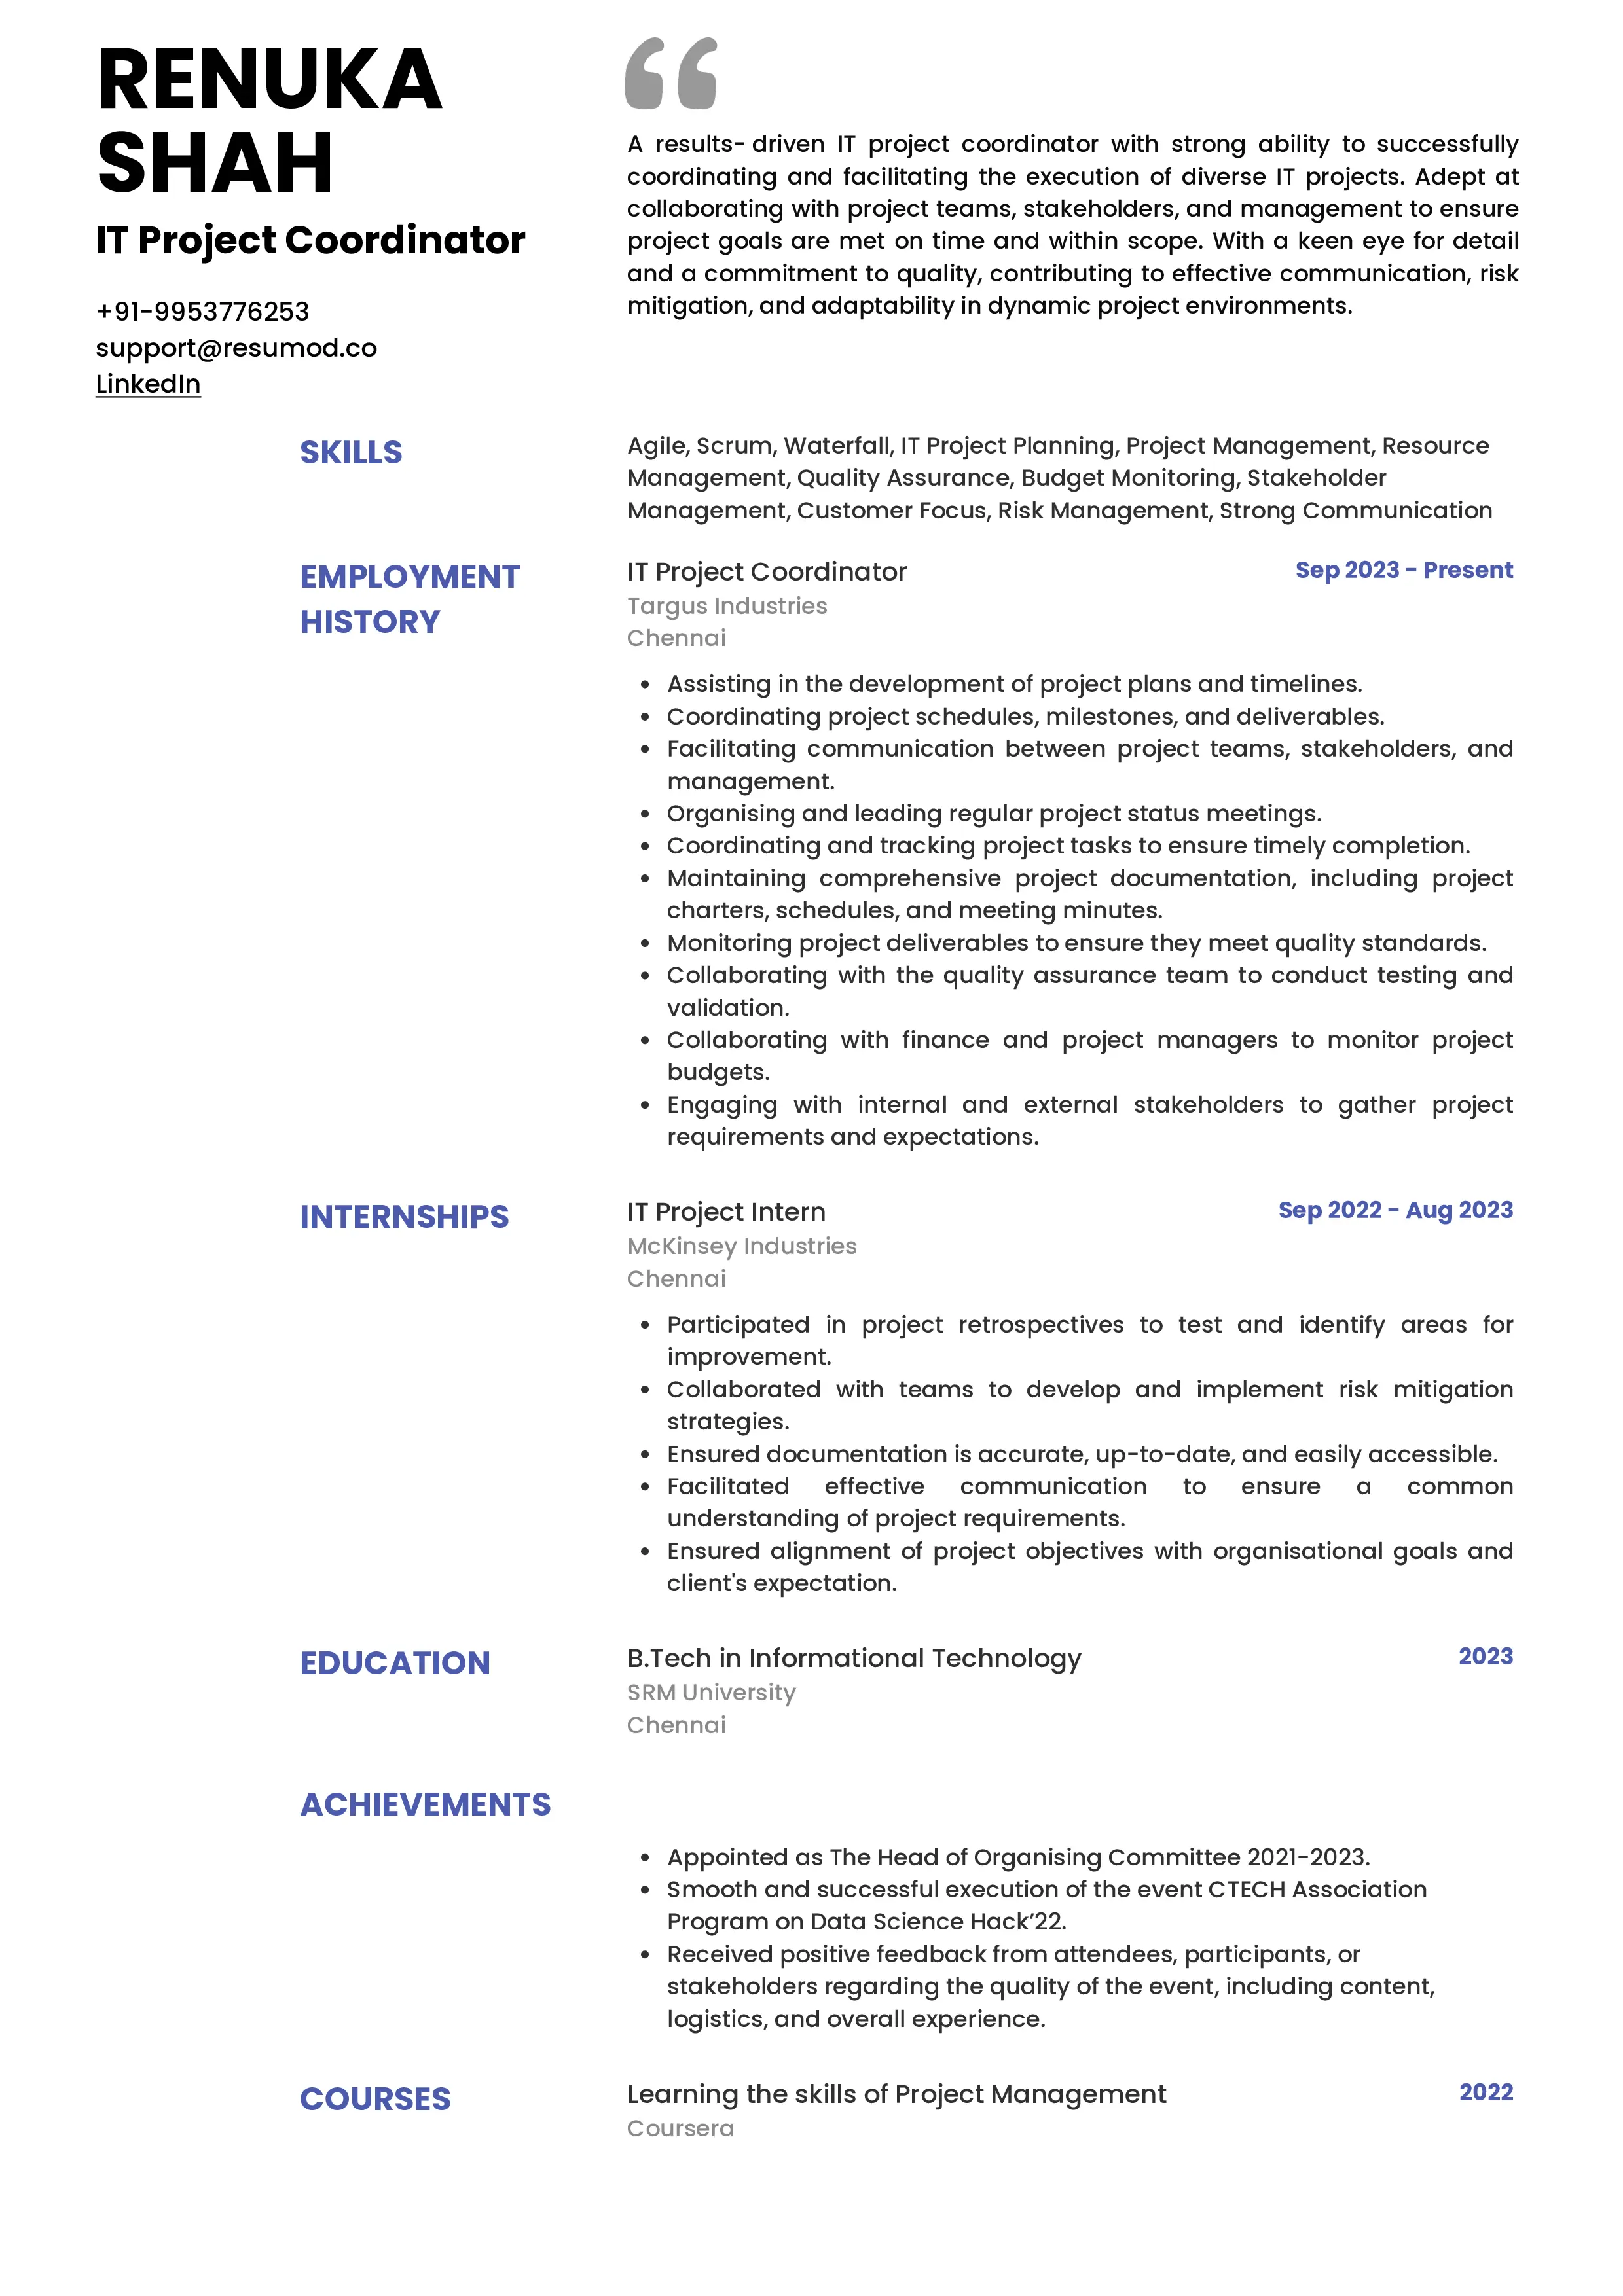 Sample Resume of IT Project Coordinator | Free Resume Templates & Samples on Resumod.co